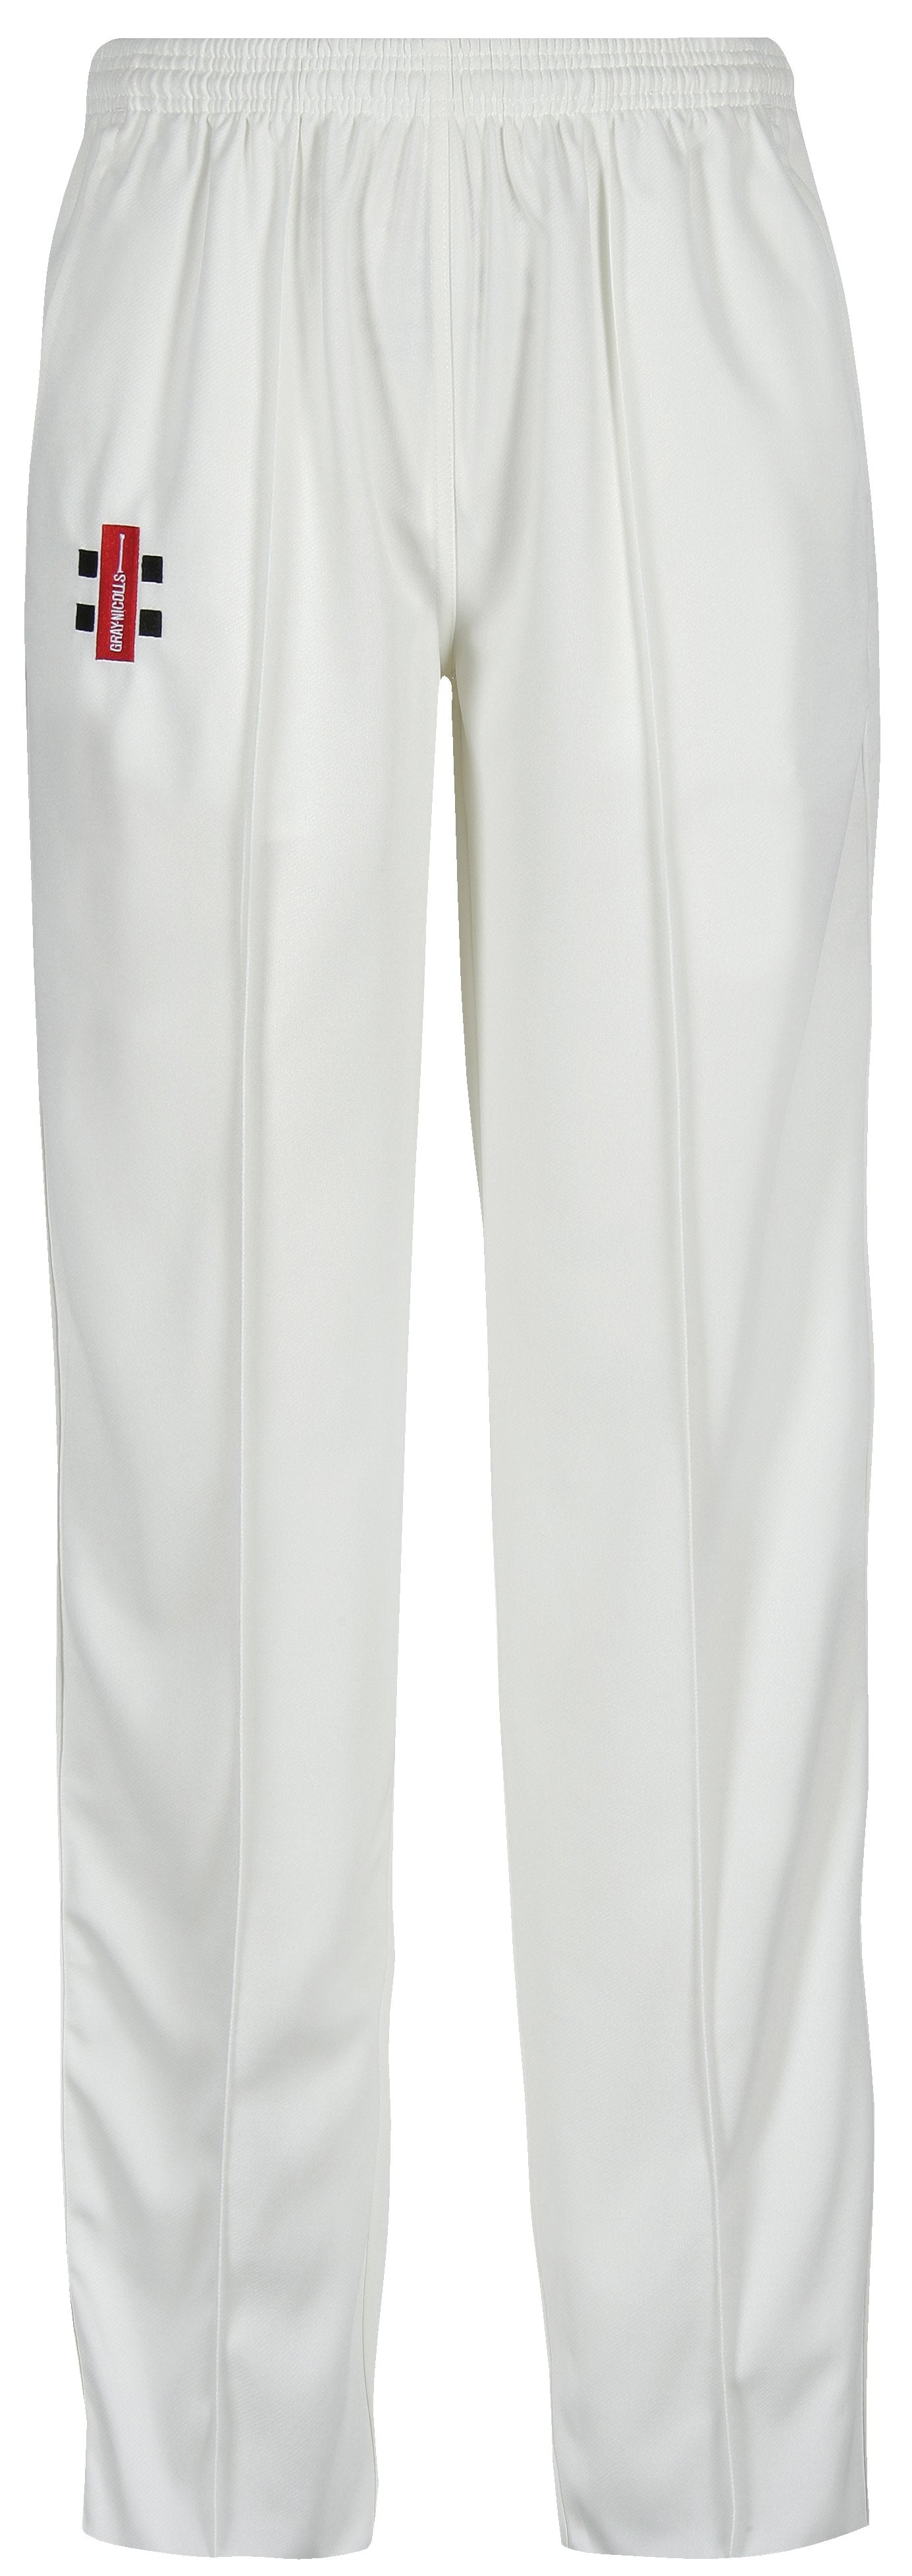 CCBC14PlayingTrousers Ladies Matrix Trousers